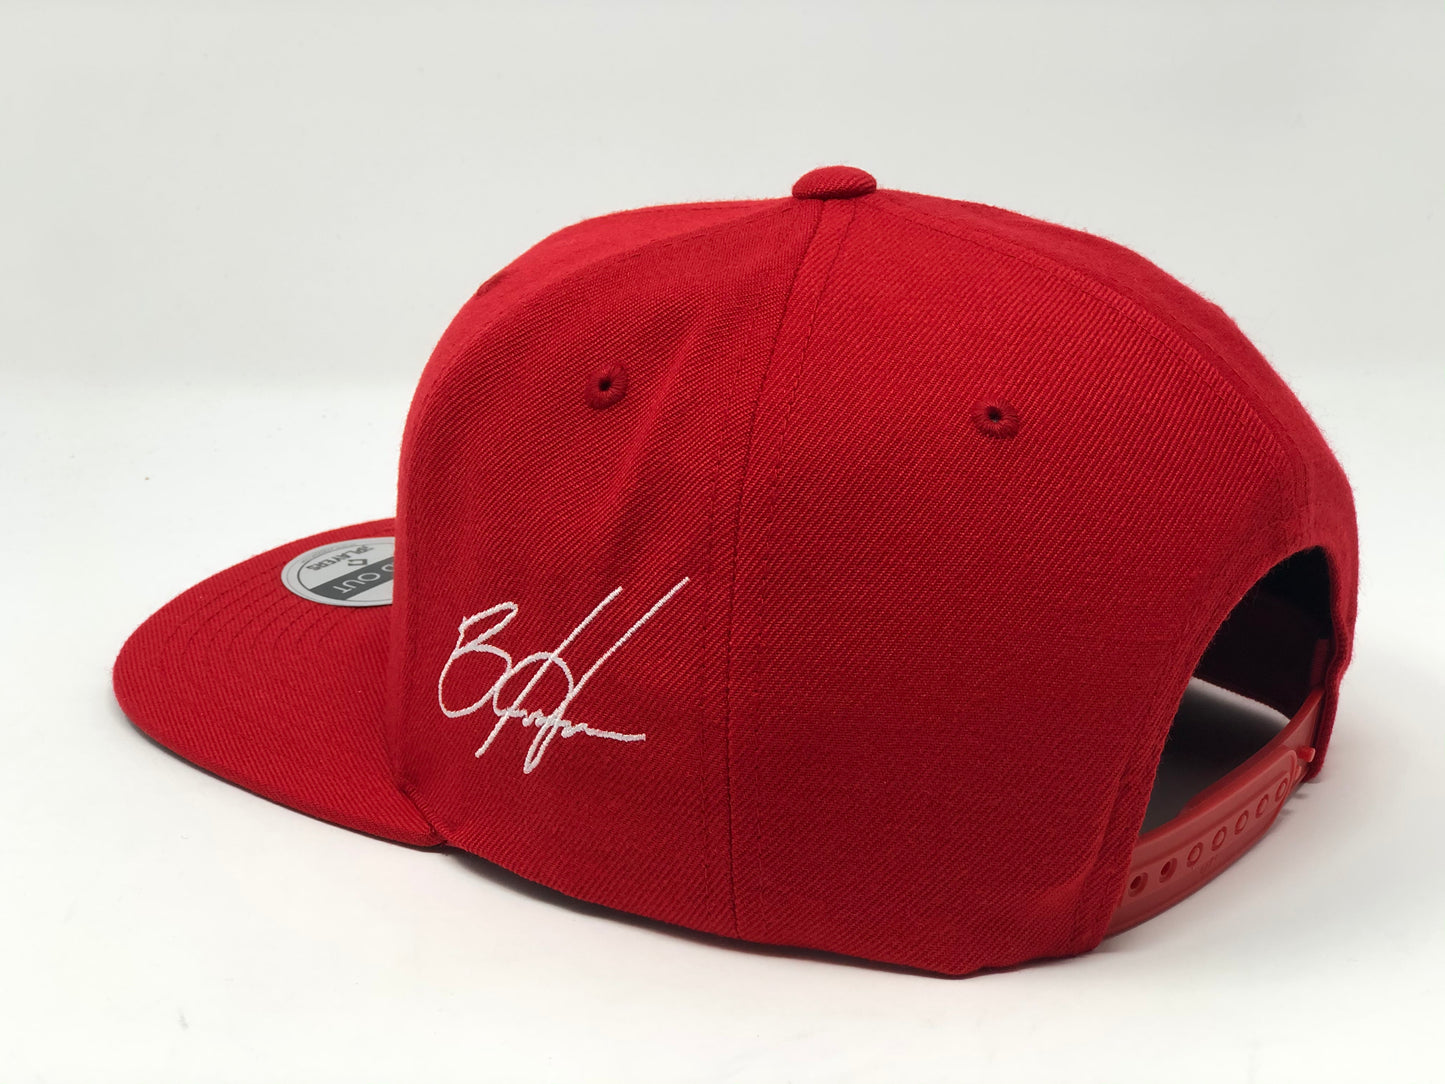 Bryce Harper Compass Hat - Red Snapback